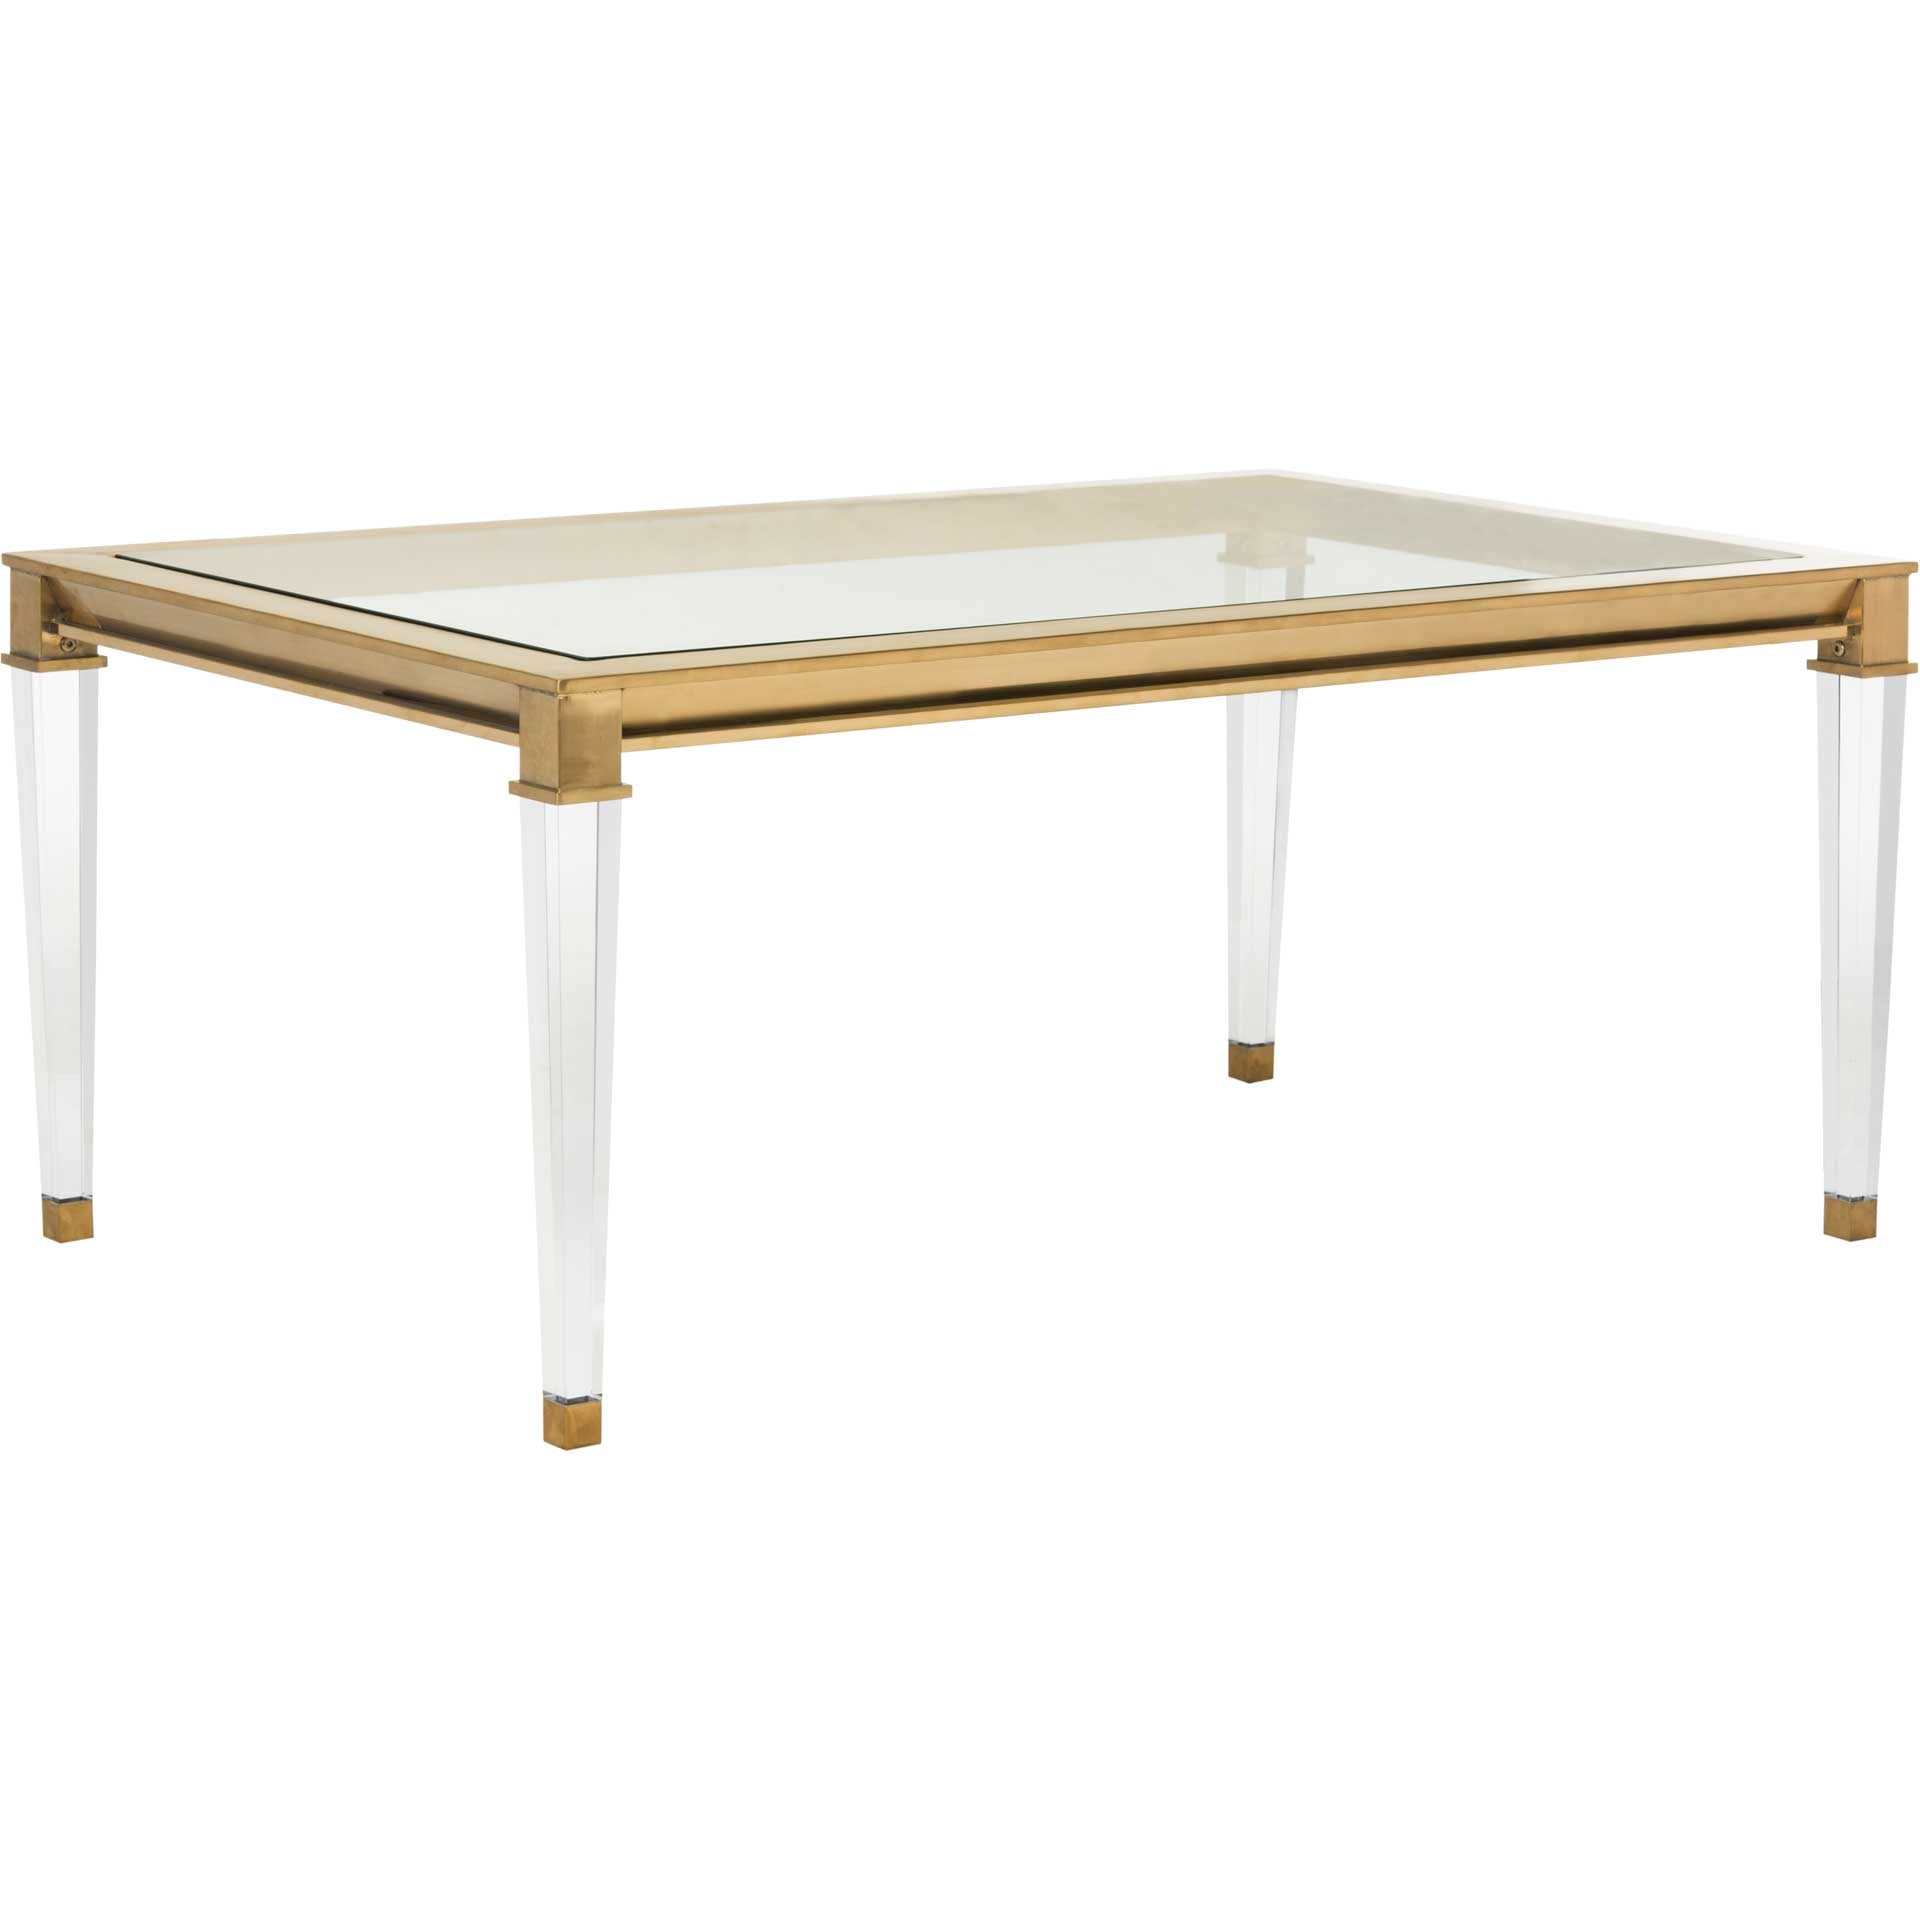 Channing Acrylic Coffee Table Brass